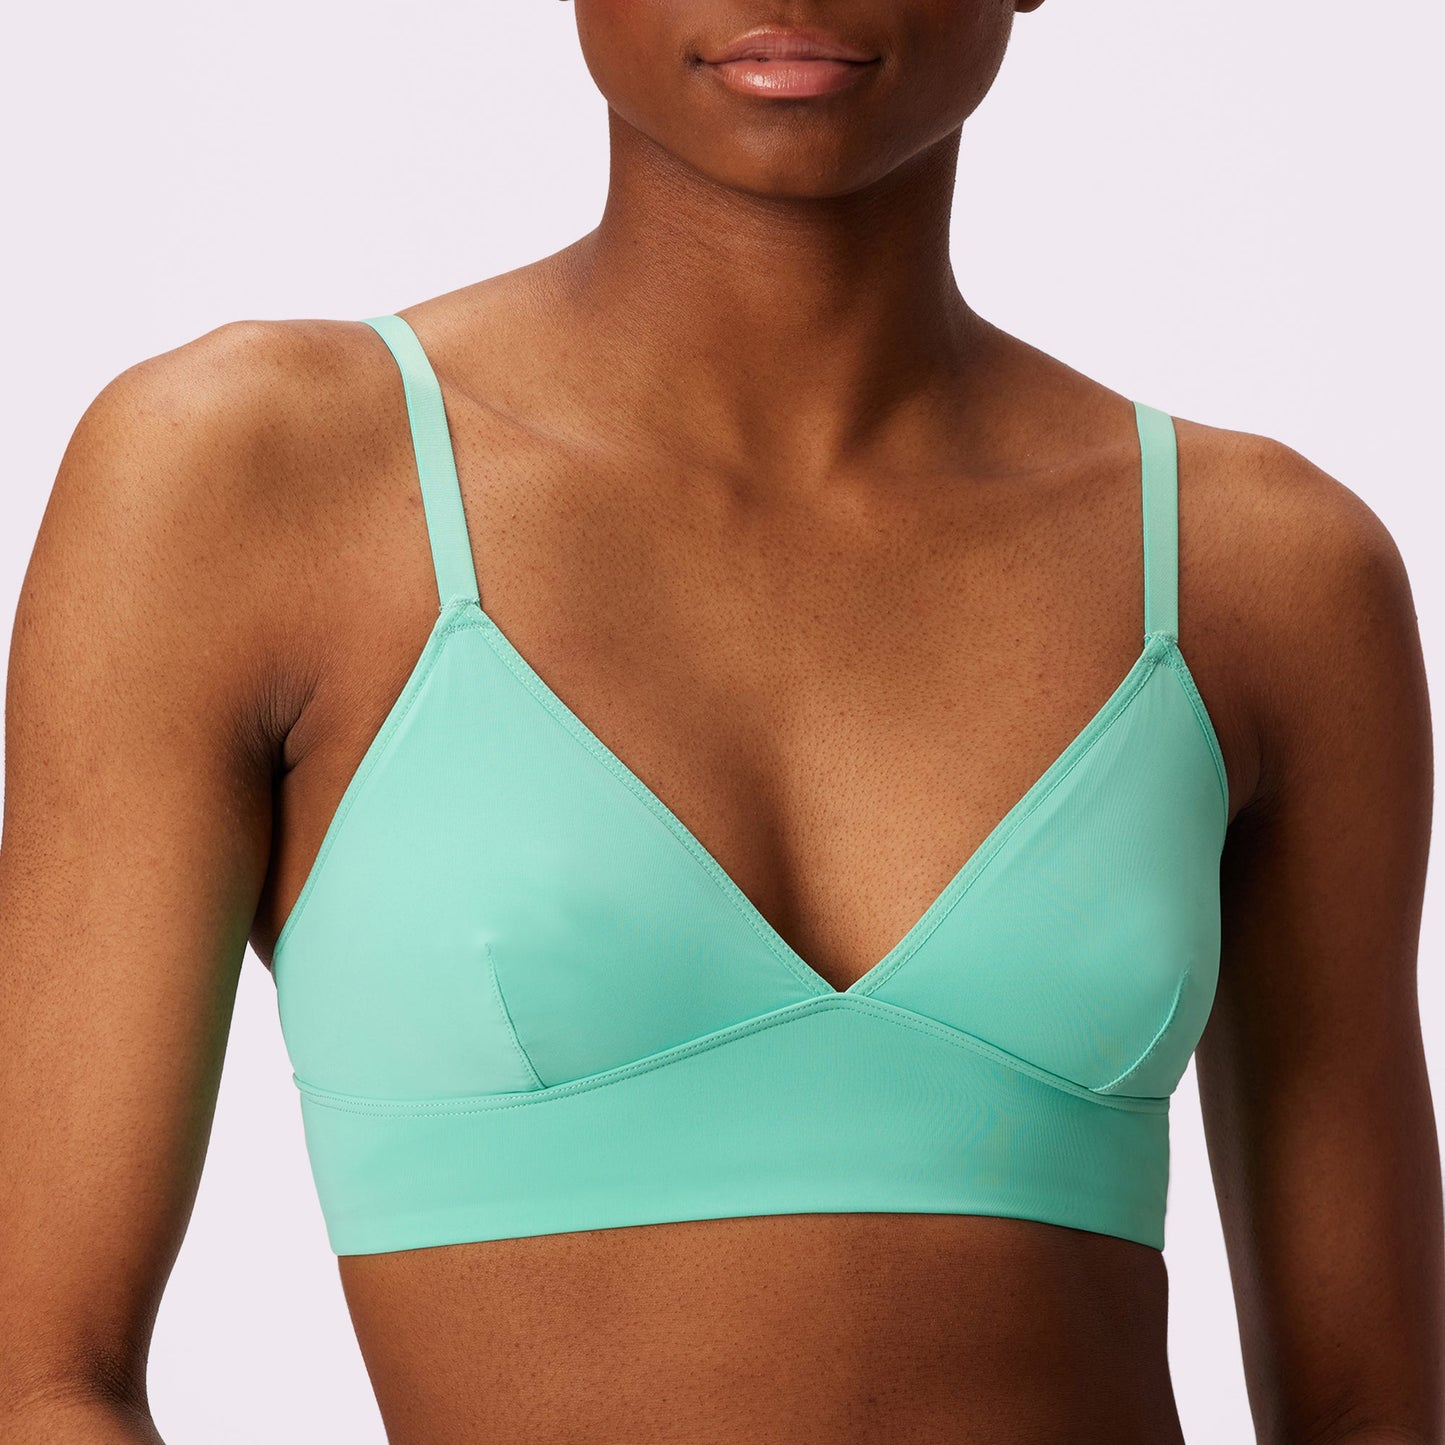 Kinflyte Drops The Dream Bra, Specifically Designed for Larger Busts